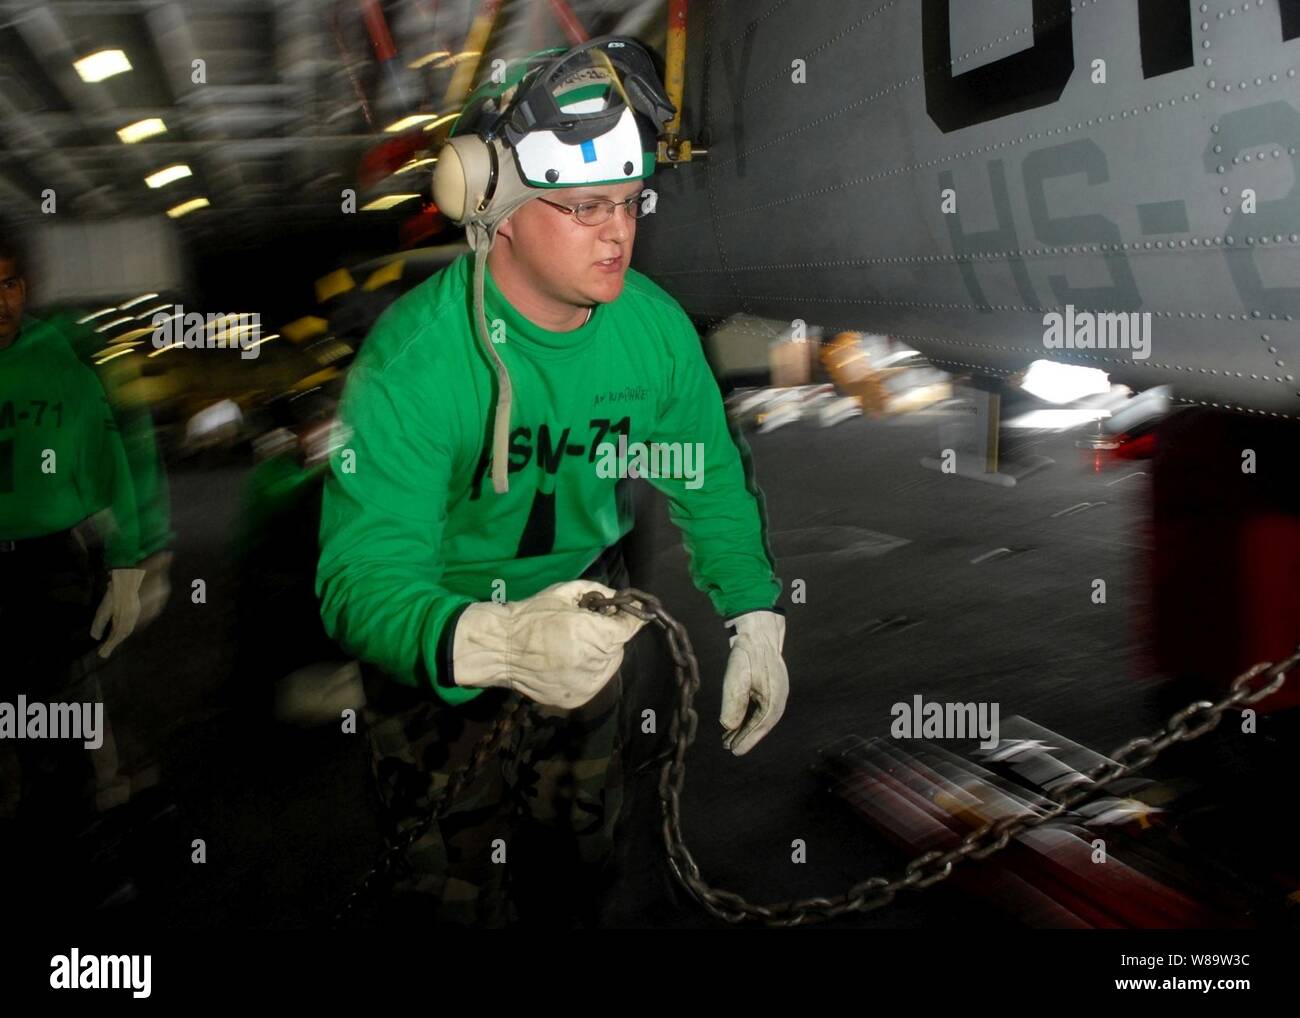 U.S. Navy Airman Cody Humphrey attaches tie-down chains to an SH-60F Seahawk helicopter in the hangar bay of the aircraft carrier USS Abraham Lincoln (CVN 72) while under way in the Pacific Ocean on July 30, 2007. Stock Photo